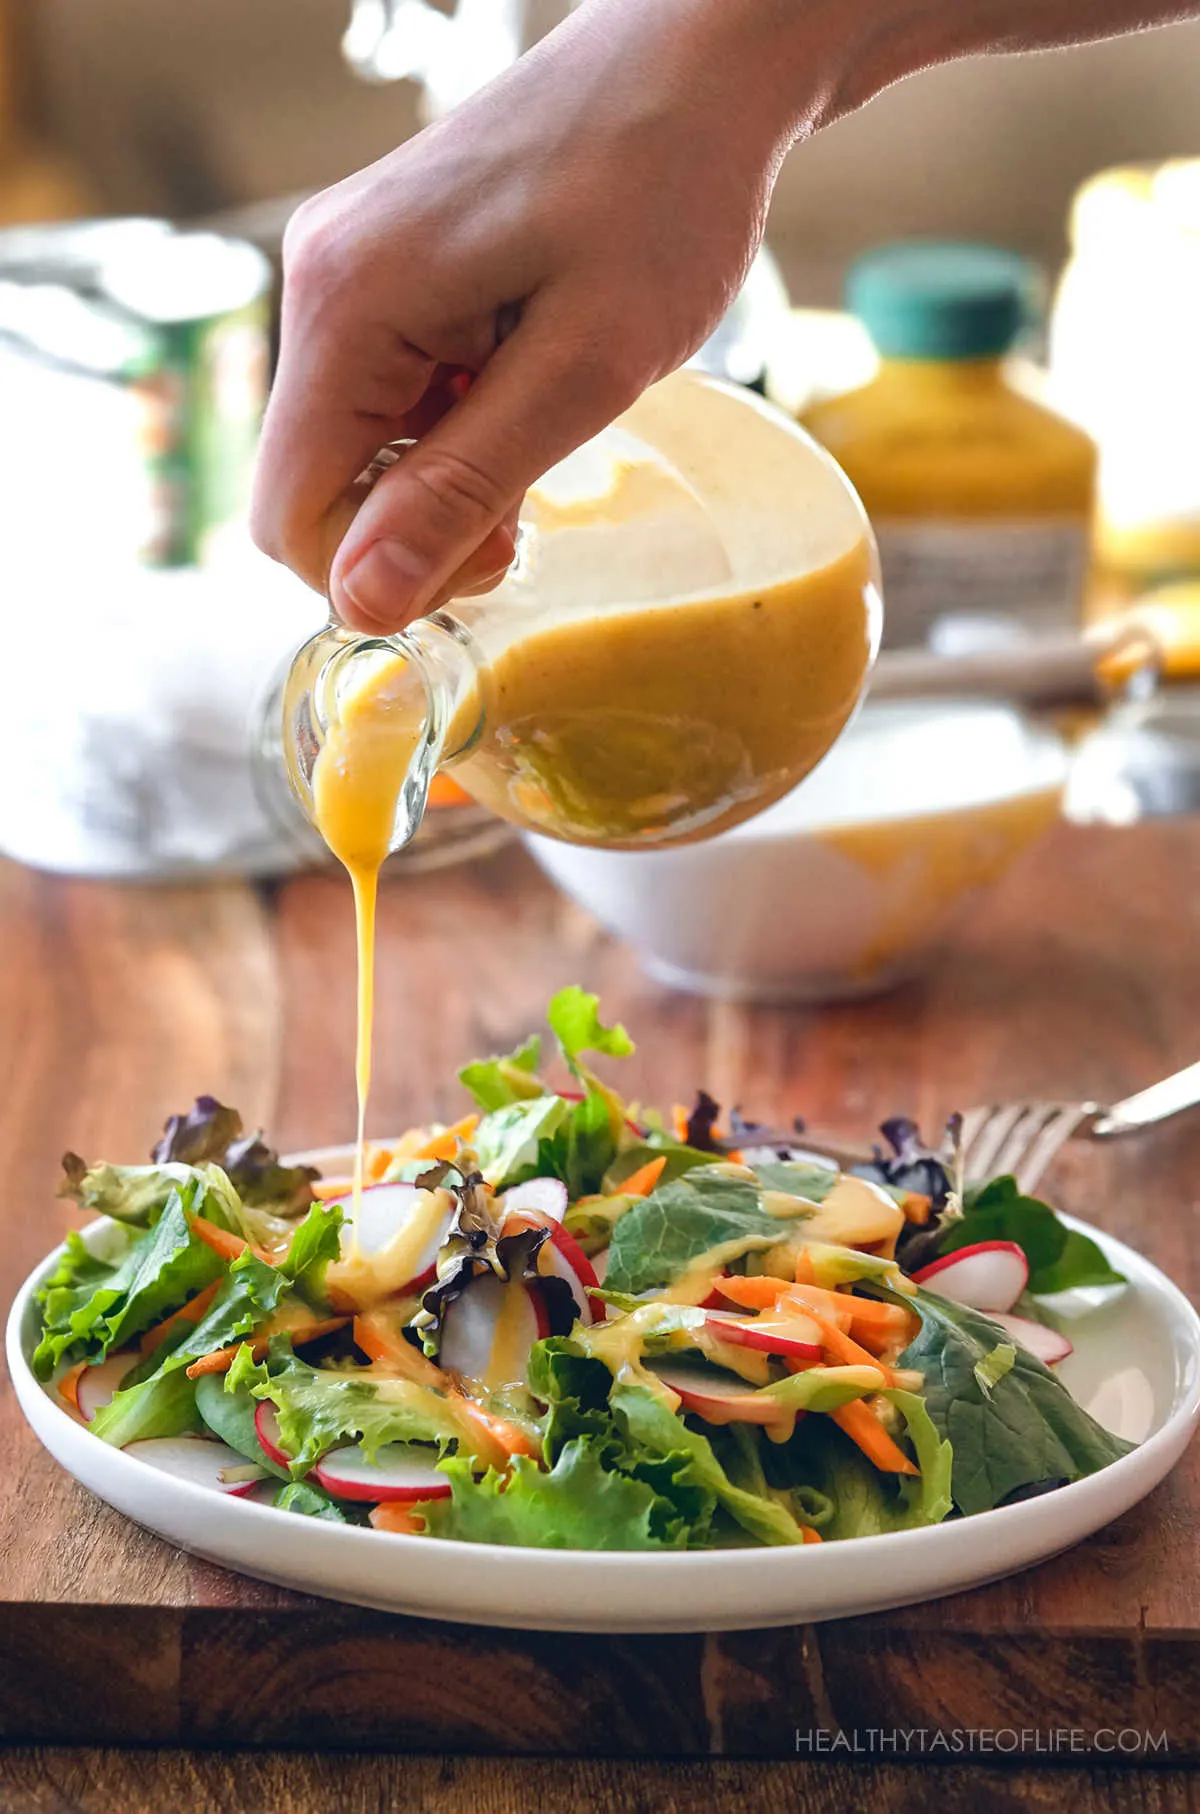 Pouring the mayo free honey mustard sauce over a plate of salad.